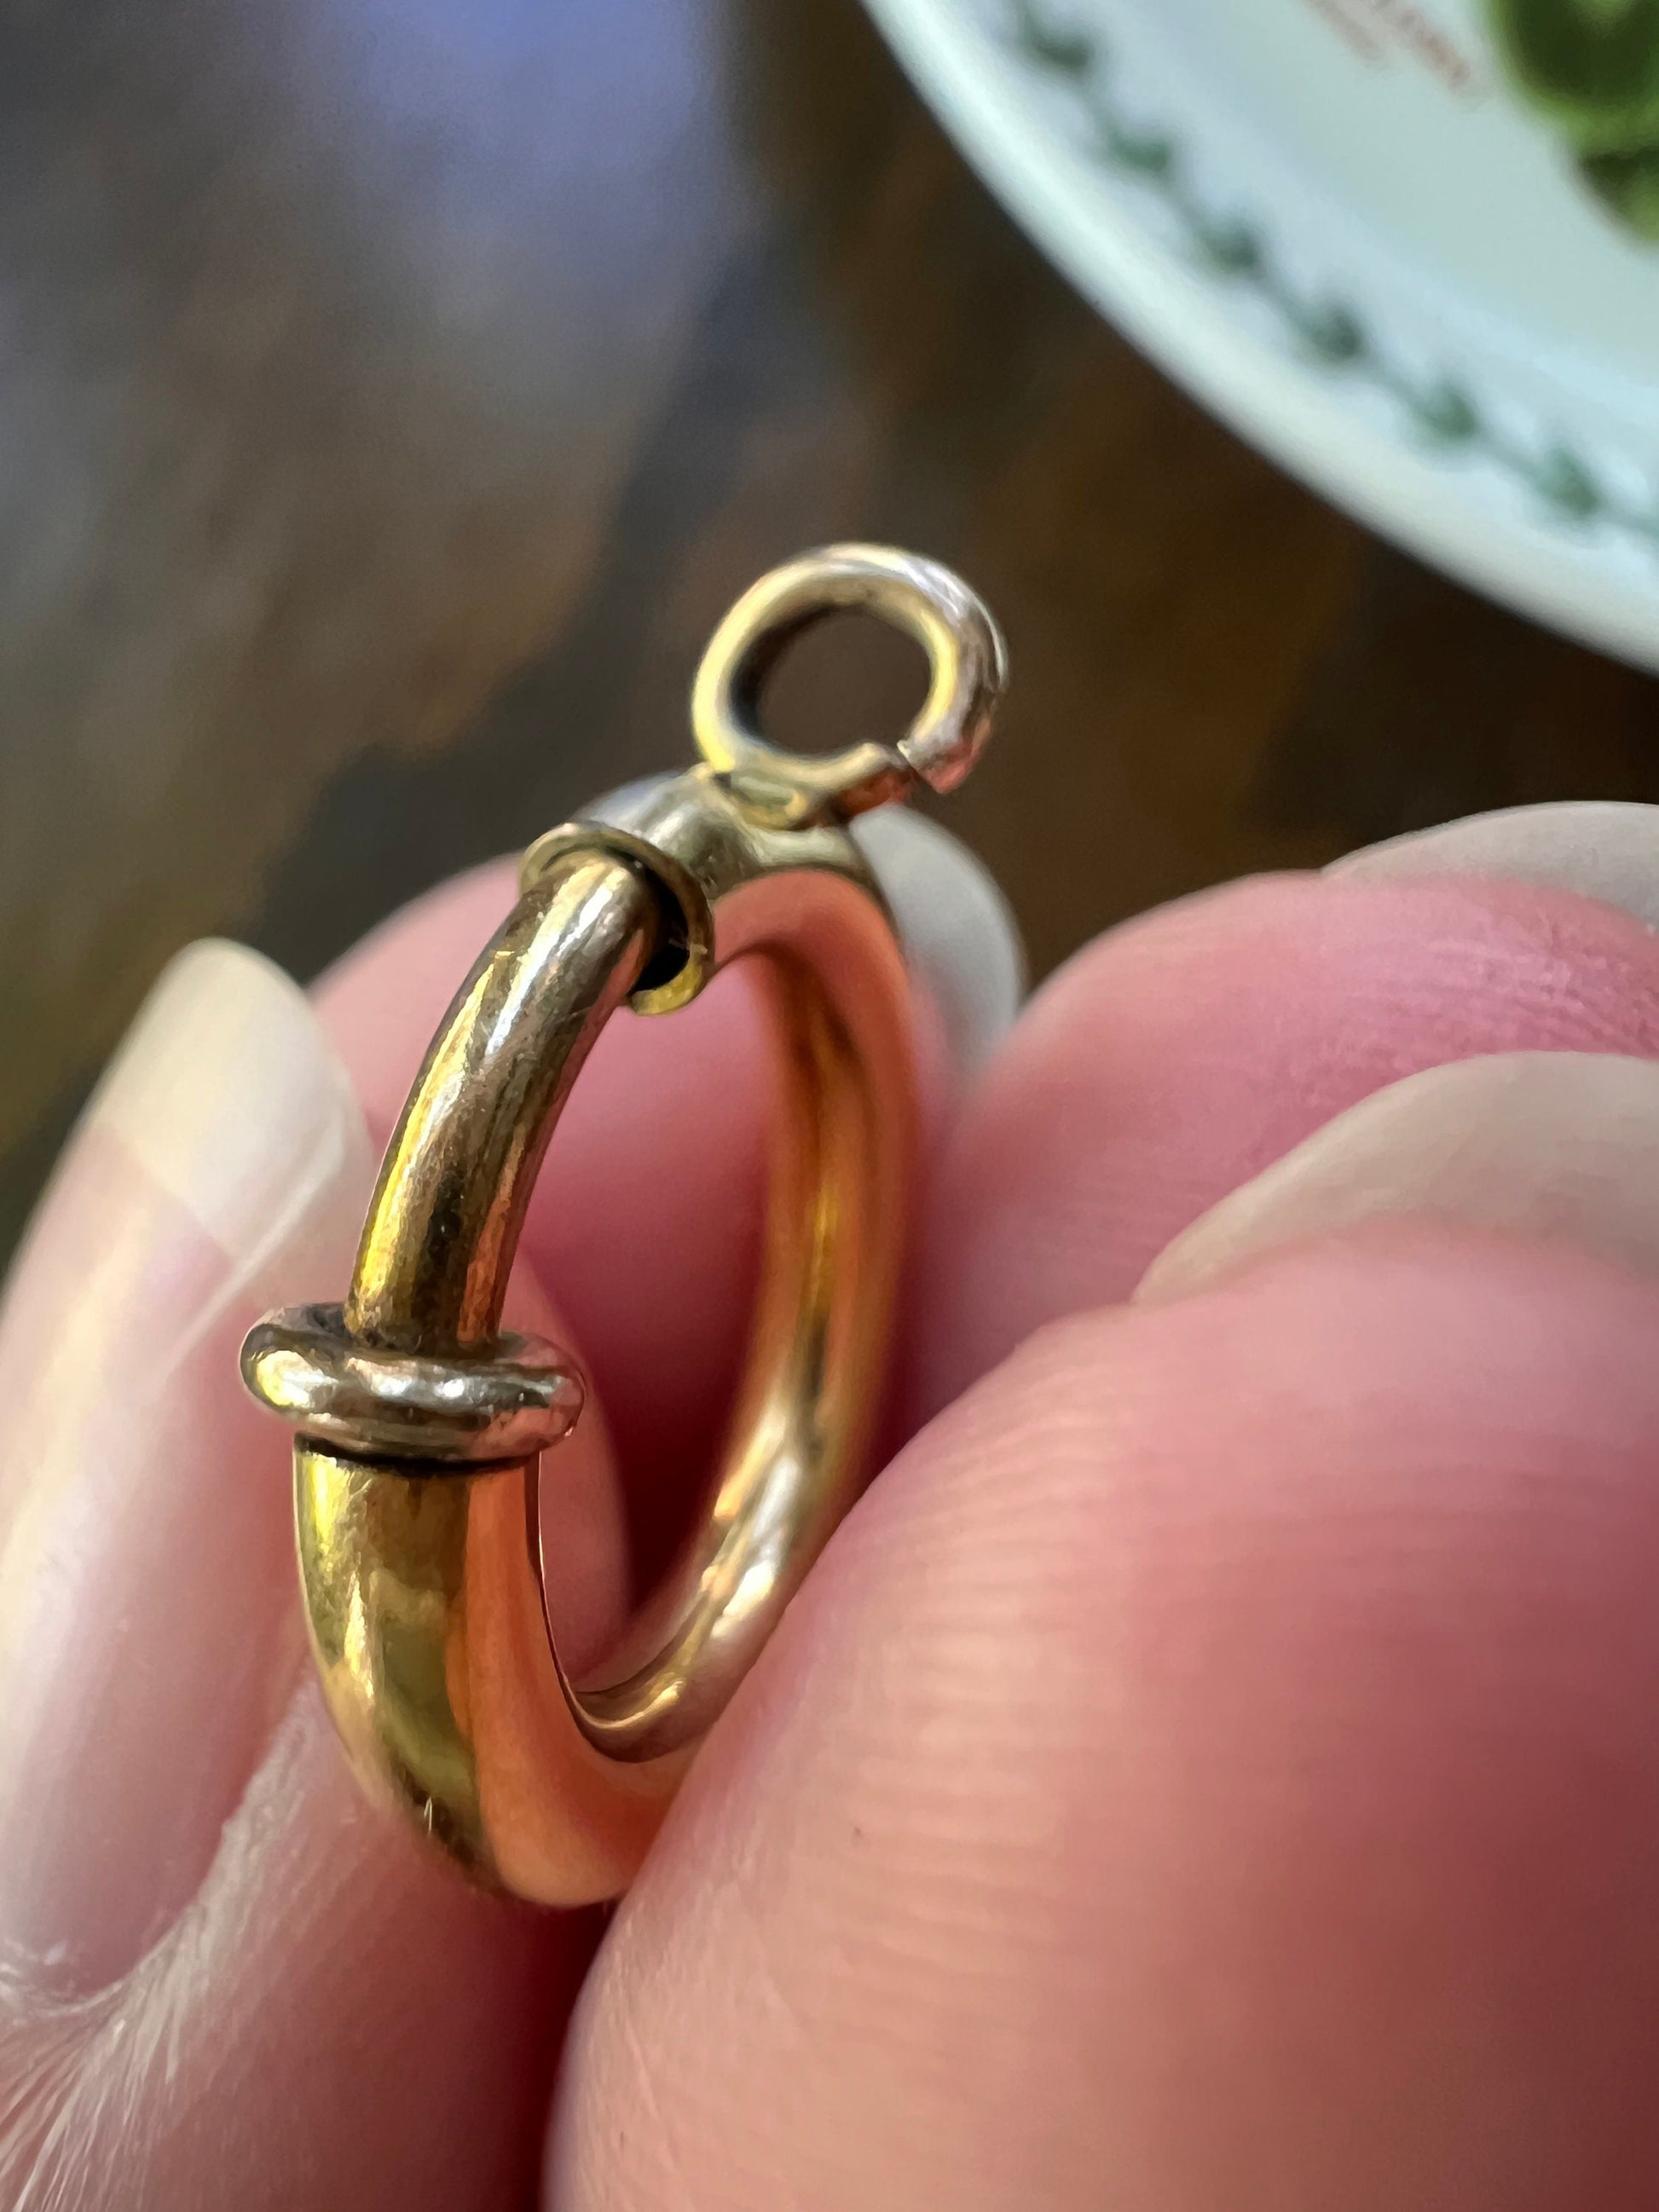 VICTORIAN XL Spring Ring ANTIQUE Gold Fill 17mm Clip Clasp Pendant Holder Connector Neckmess Neckstack Chunky Sturdy Parts Findings